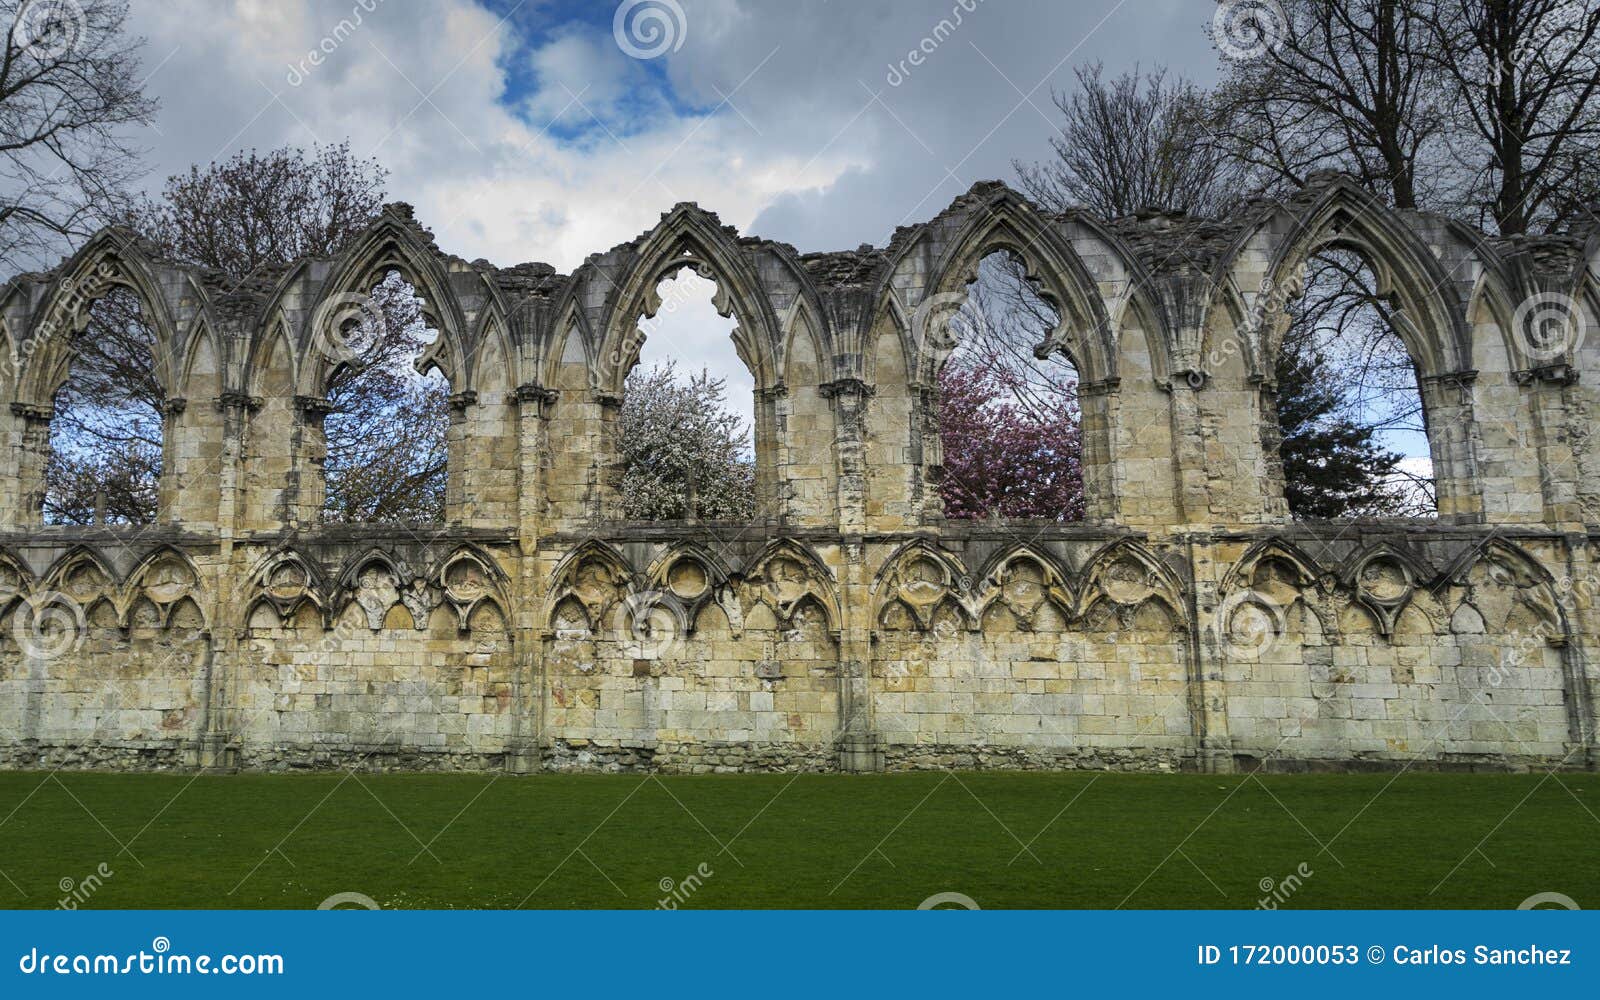 arches of the ruins of the benedictine abbey of saint mary in the english city of york.